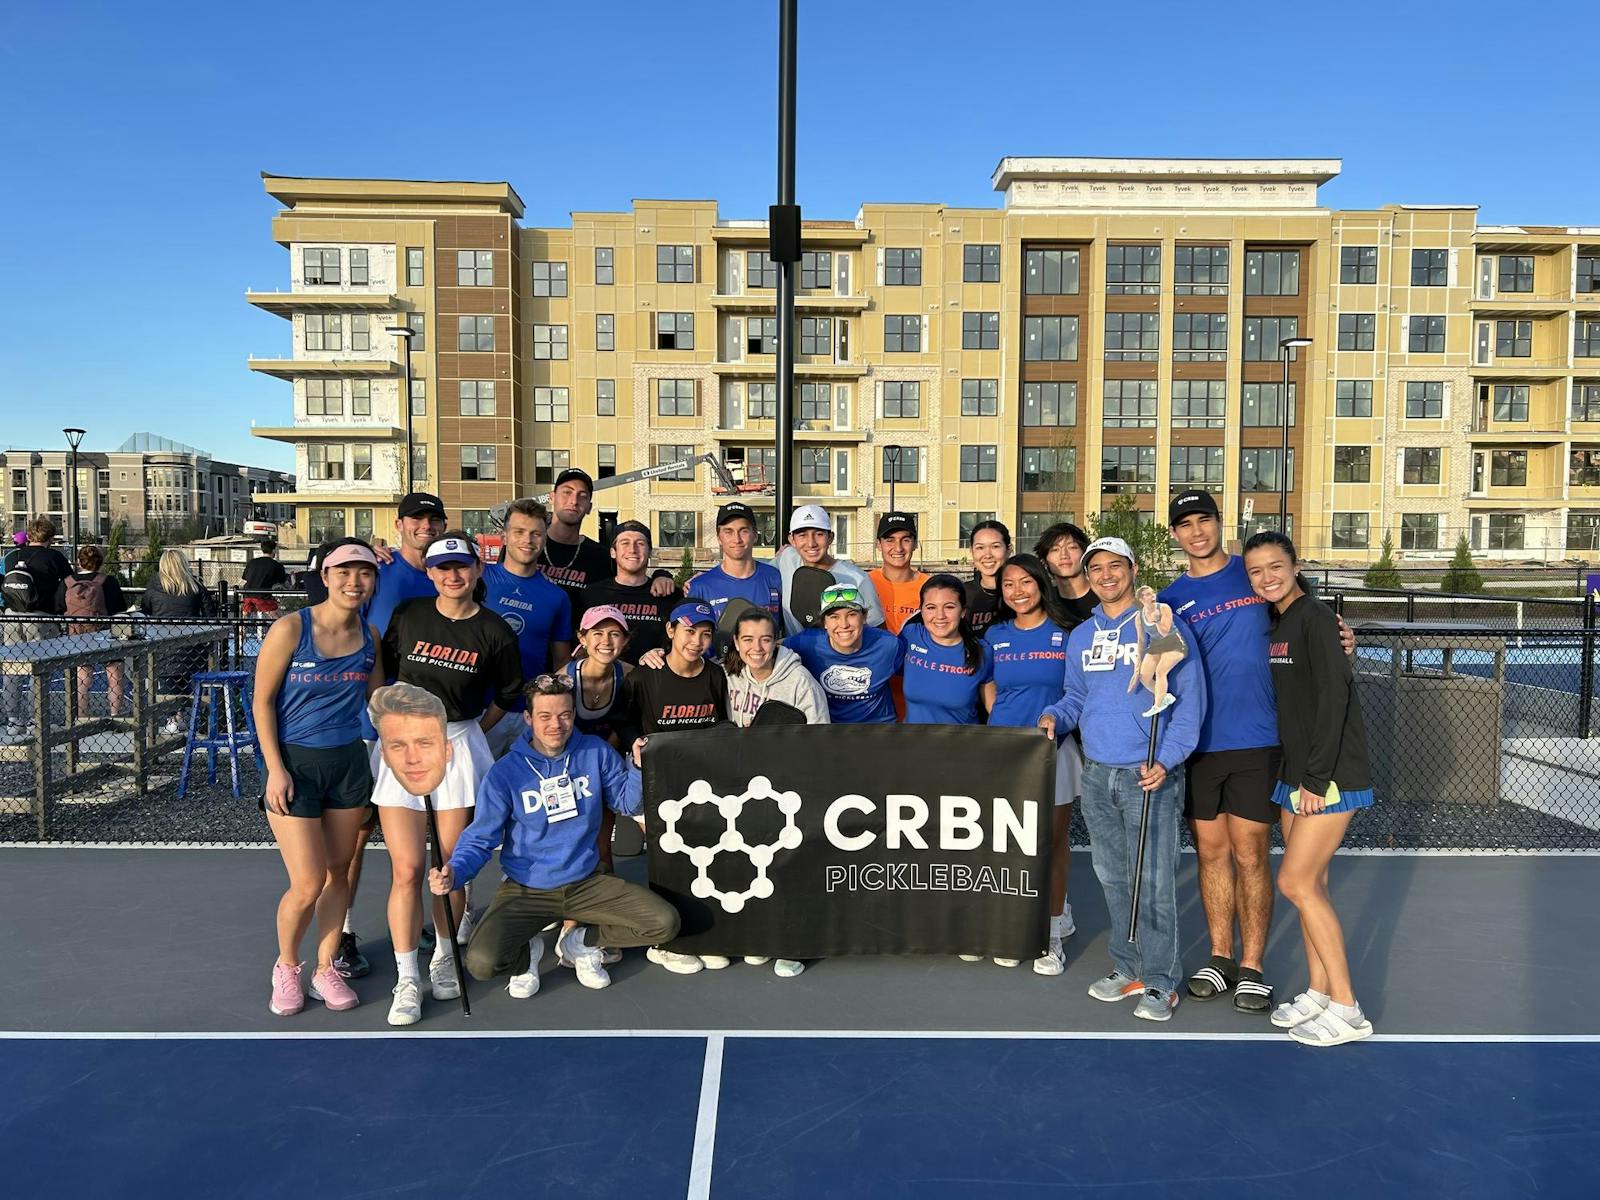 UF pickleball club among the top 10 in the USA